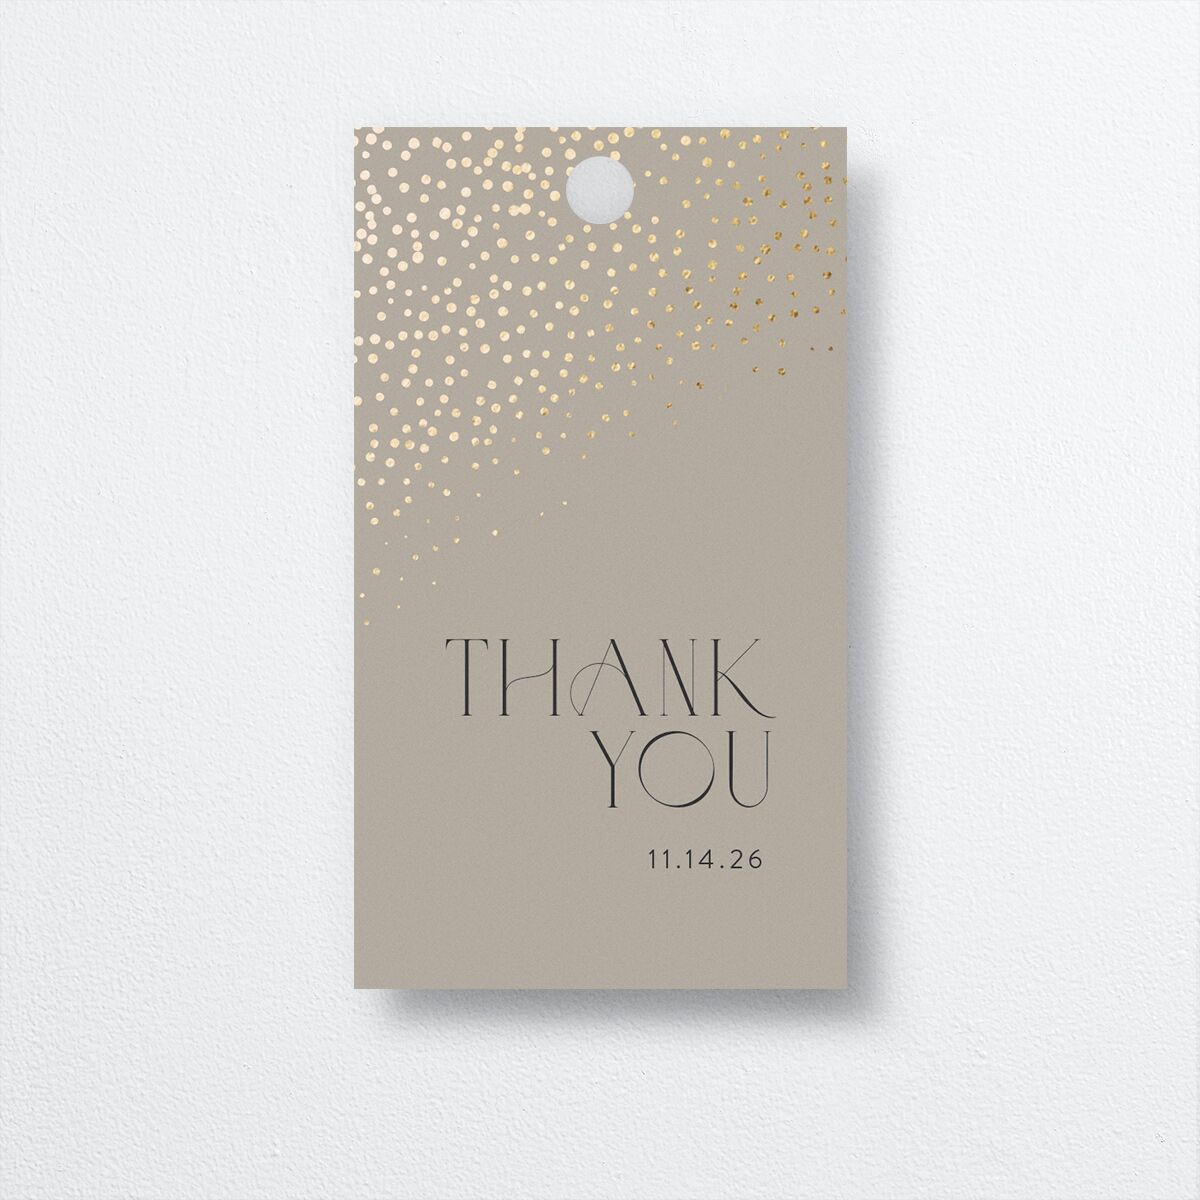 Sweeping Sparkles Favor Gift Tags back in brown